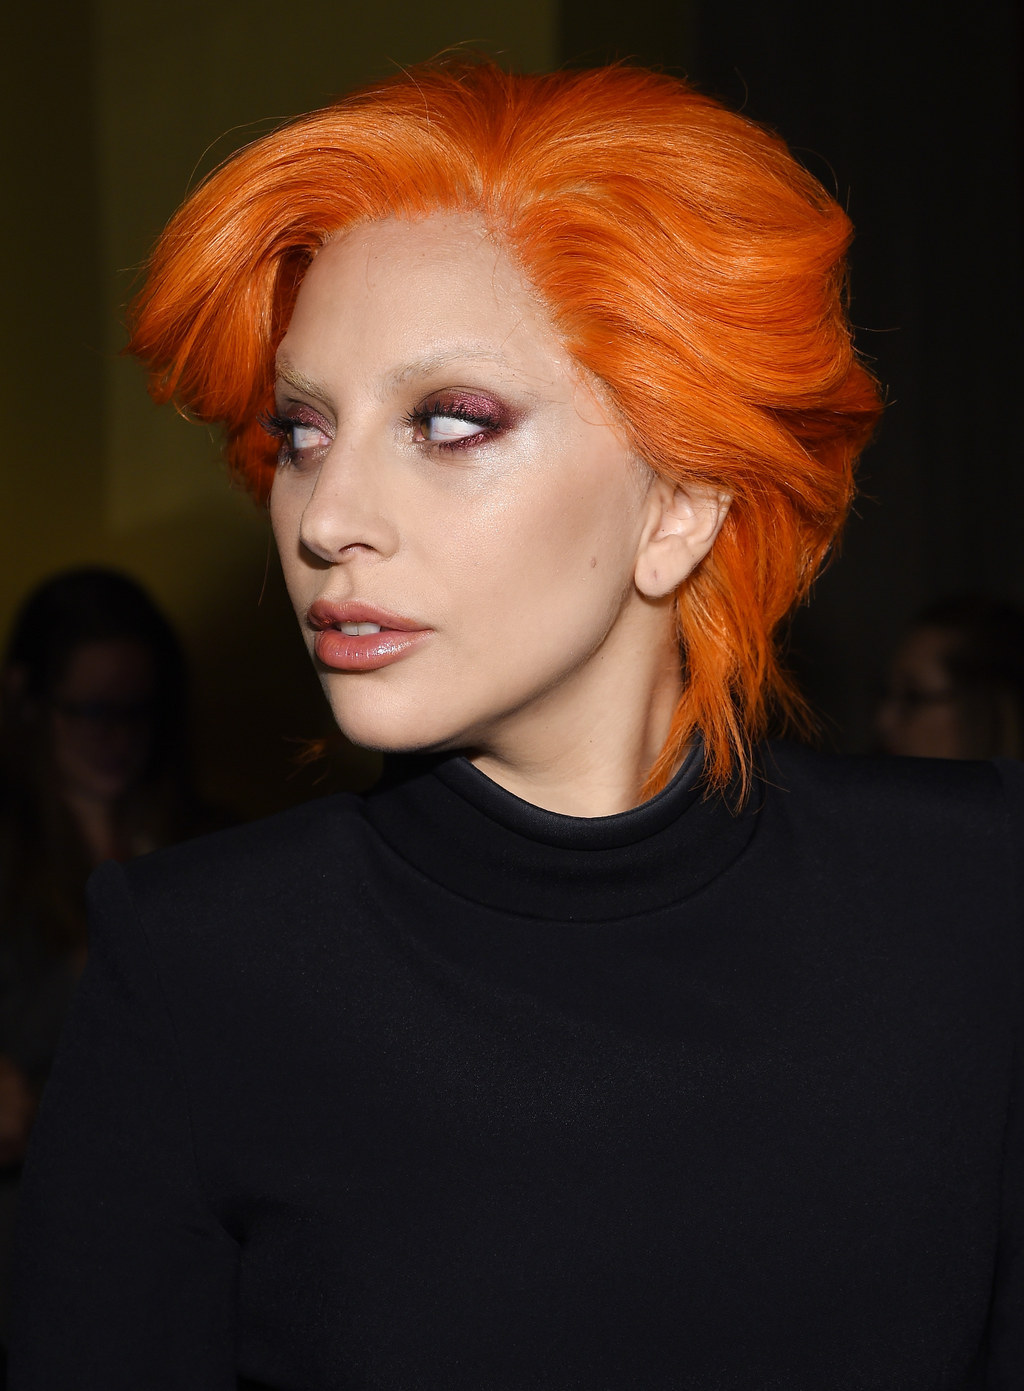 Mild Skærpe Jolly Lady Gaga Is Sticking With Her Orange David Bowie Hair For Now